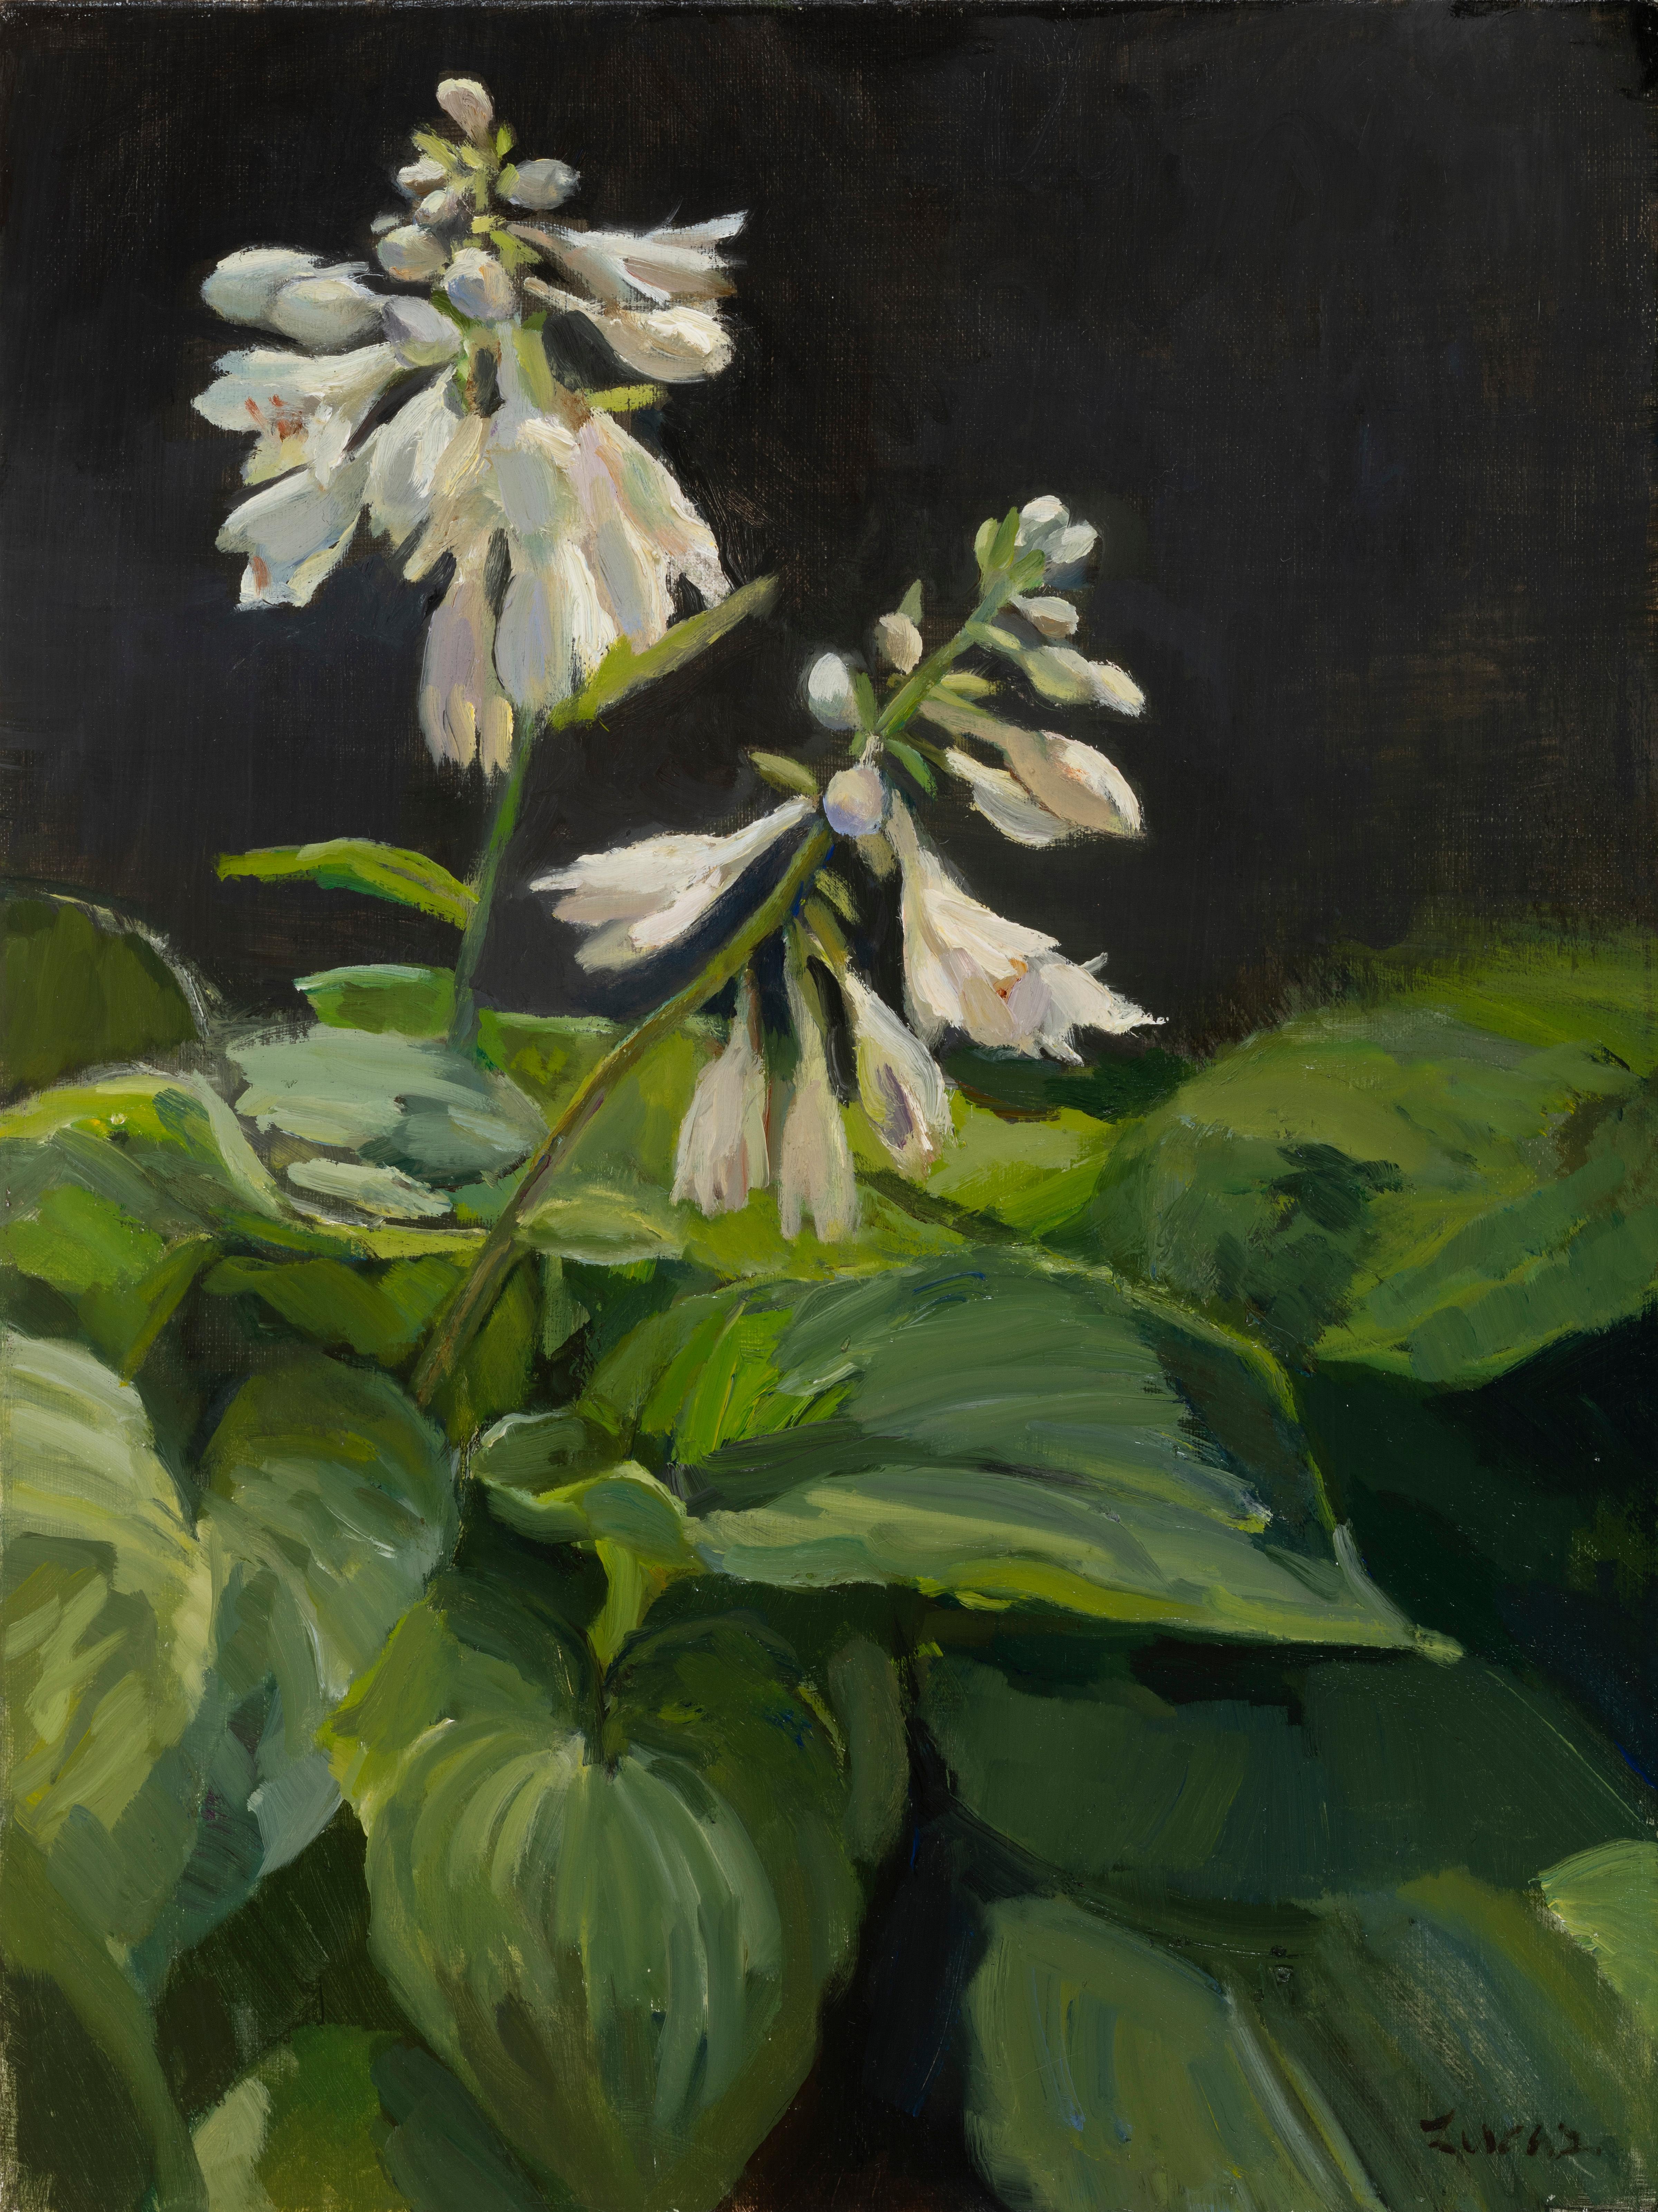 Maryann Lucas Interior Painting - "Glow Up" contemporary realist white flowers & green leaves on black background